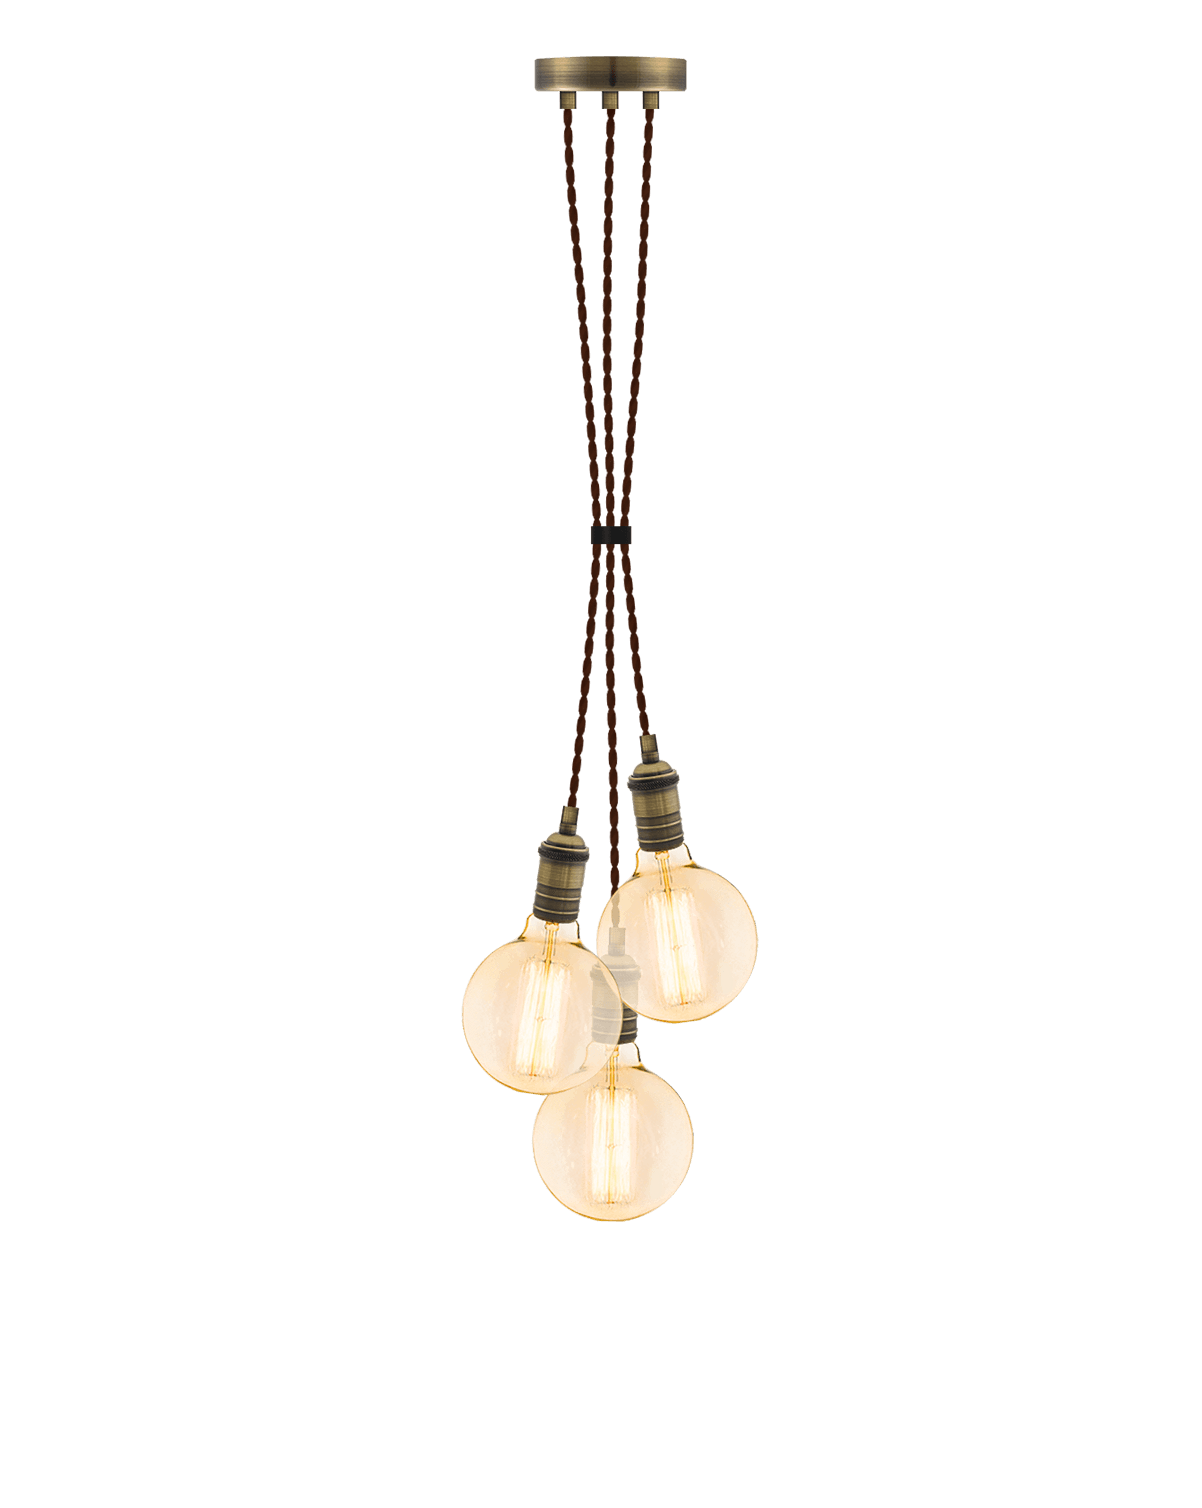 Cluster Chandelier - Grape: Brown and Antique Brass Hangout Lighting 3 Grape